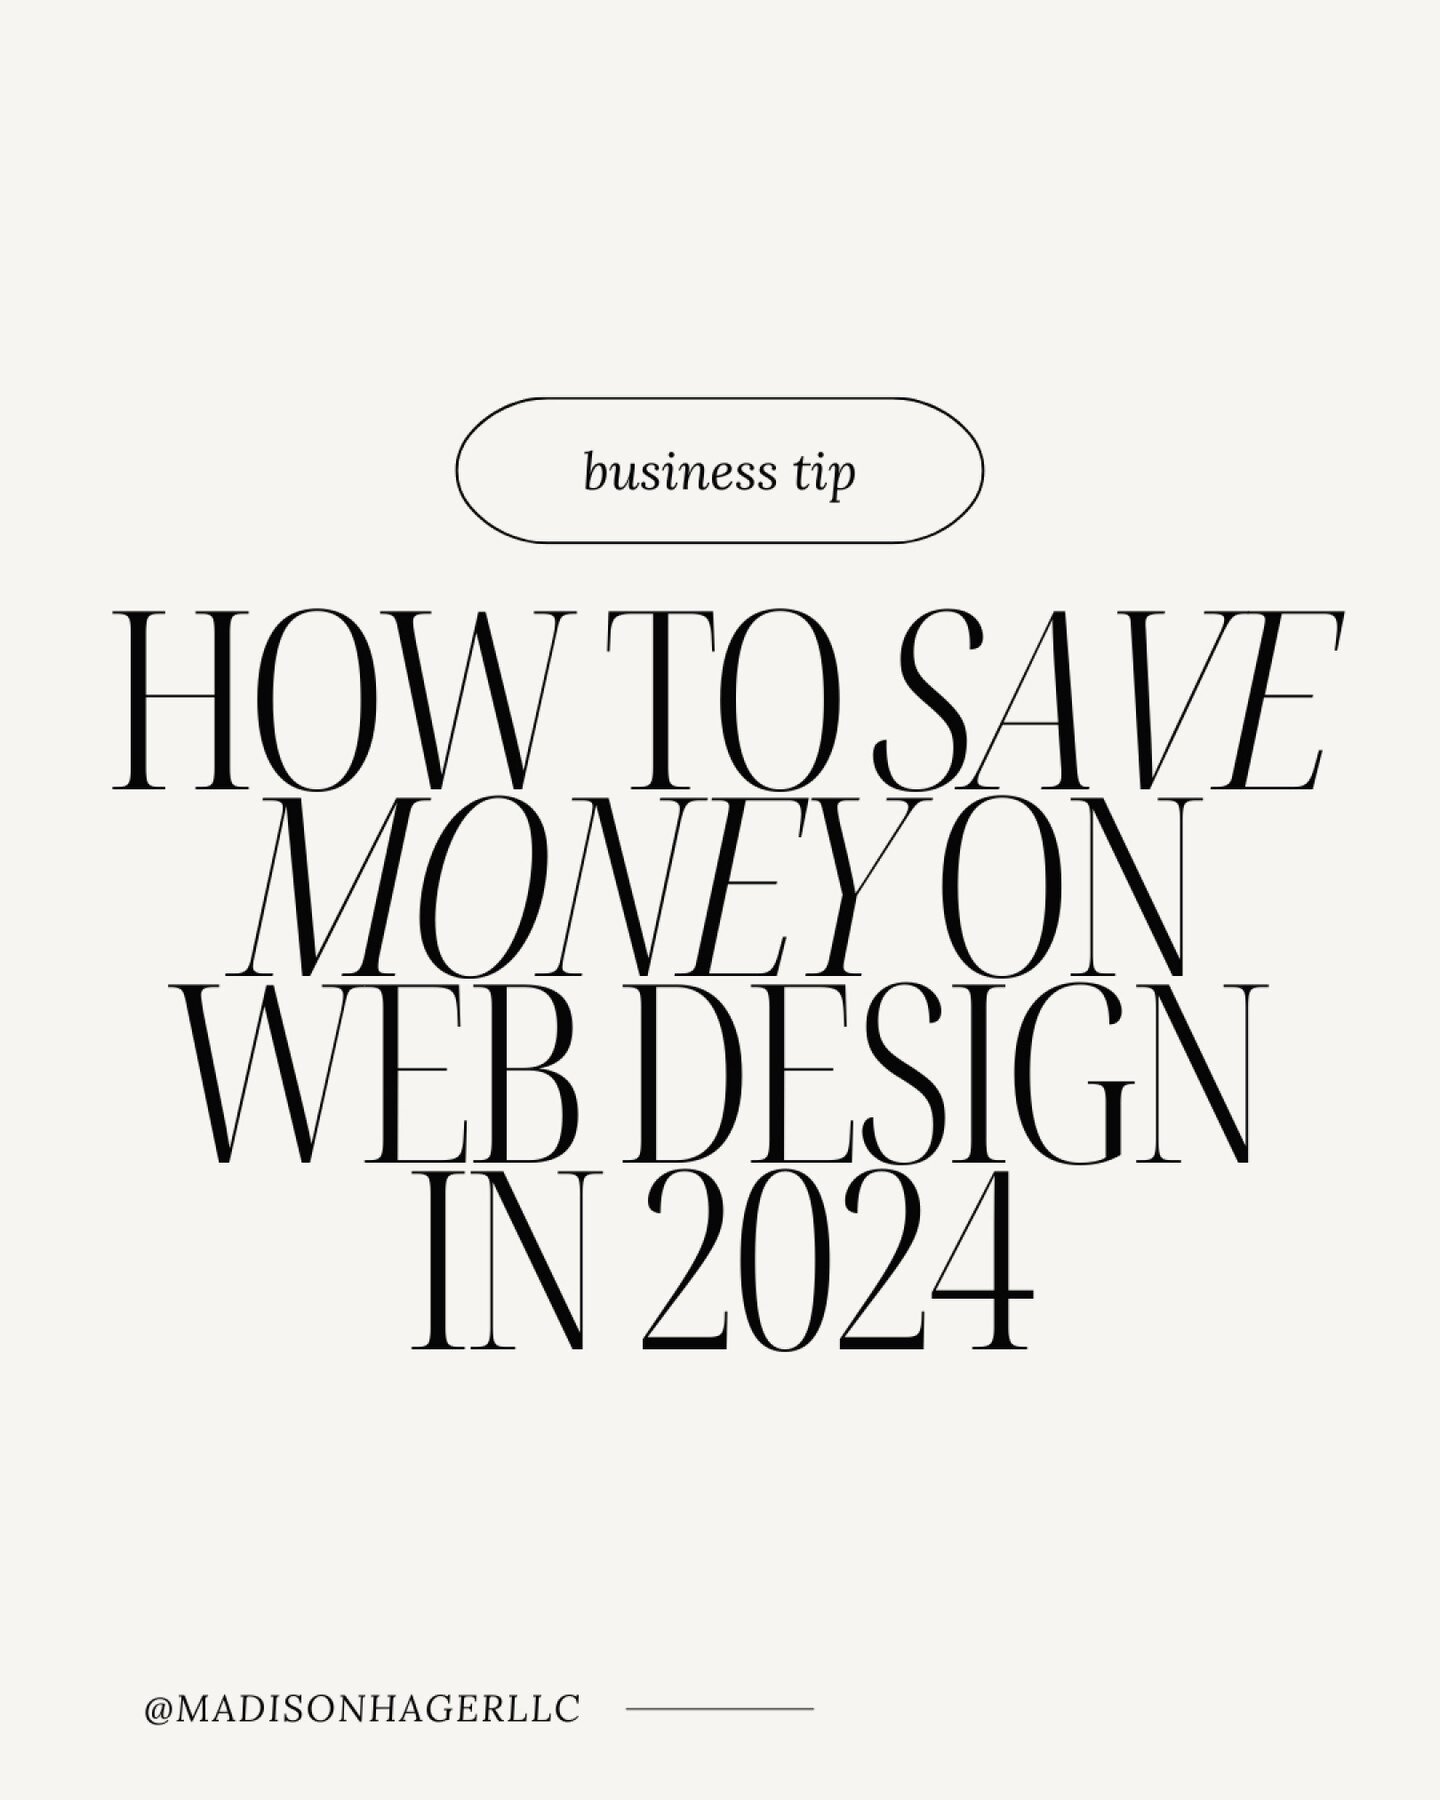 Your budget is tight, but you reaaally need a website, but every designer you find has high rates &amp; fees...

When considering a website, it's important to maintain the mindset that a website is an *investment* for your business.

They also requir